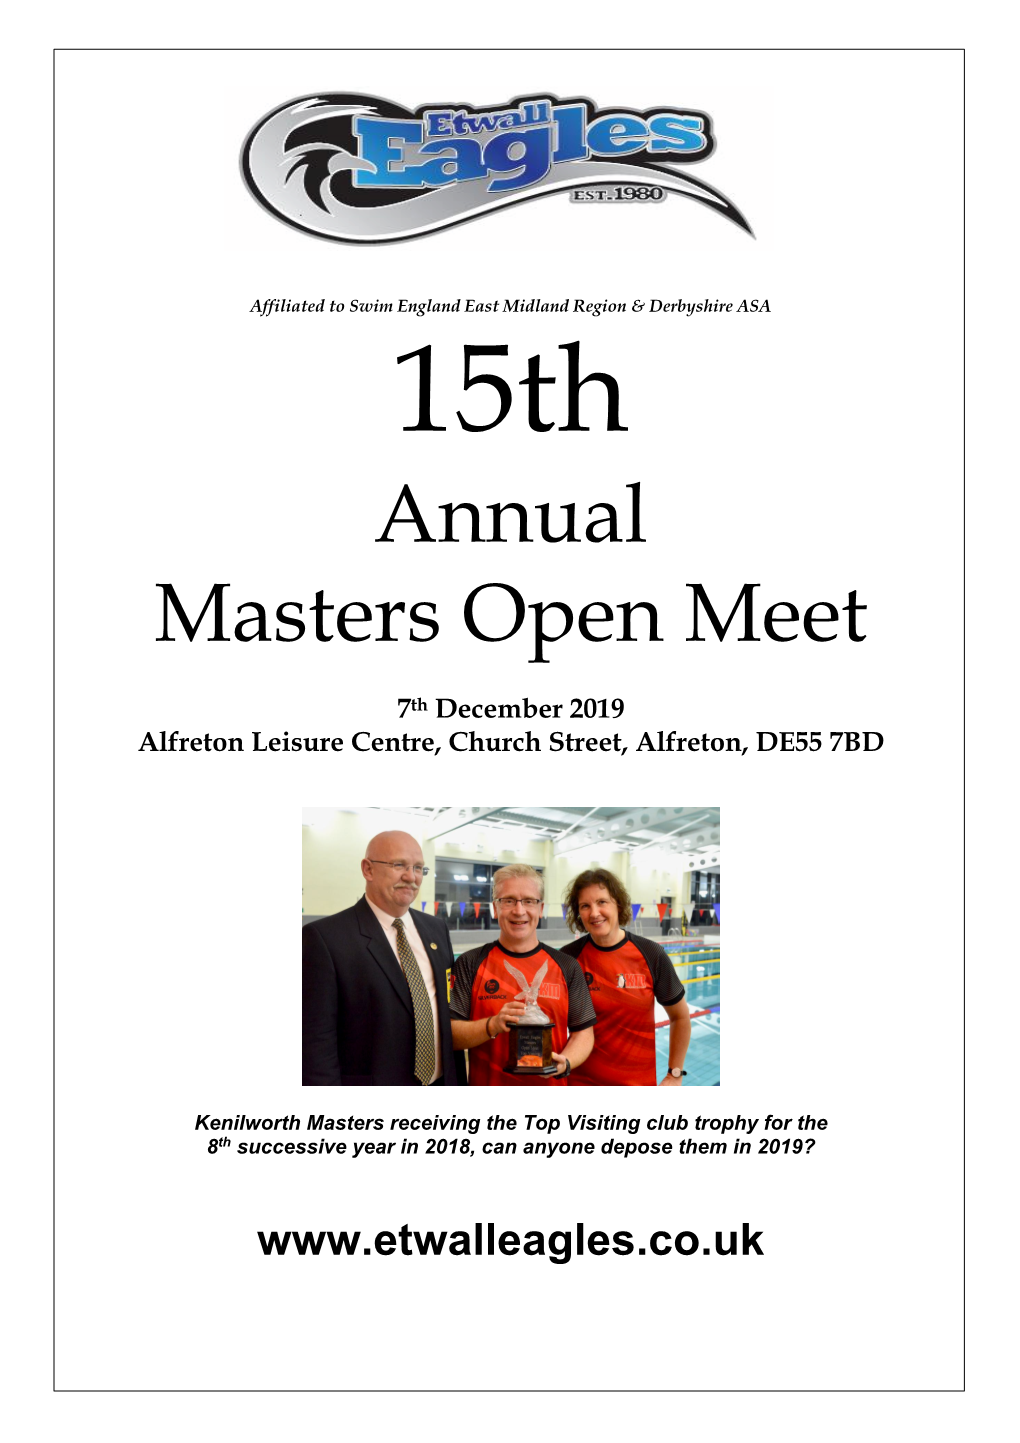 Annual Masters Open Meet